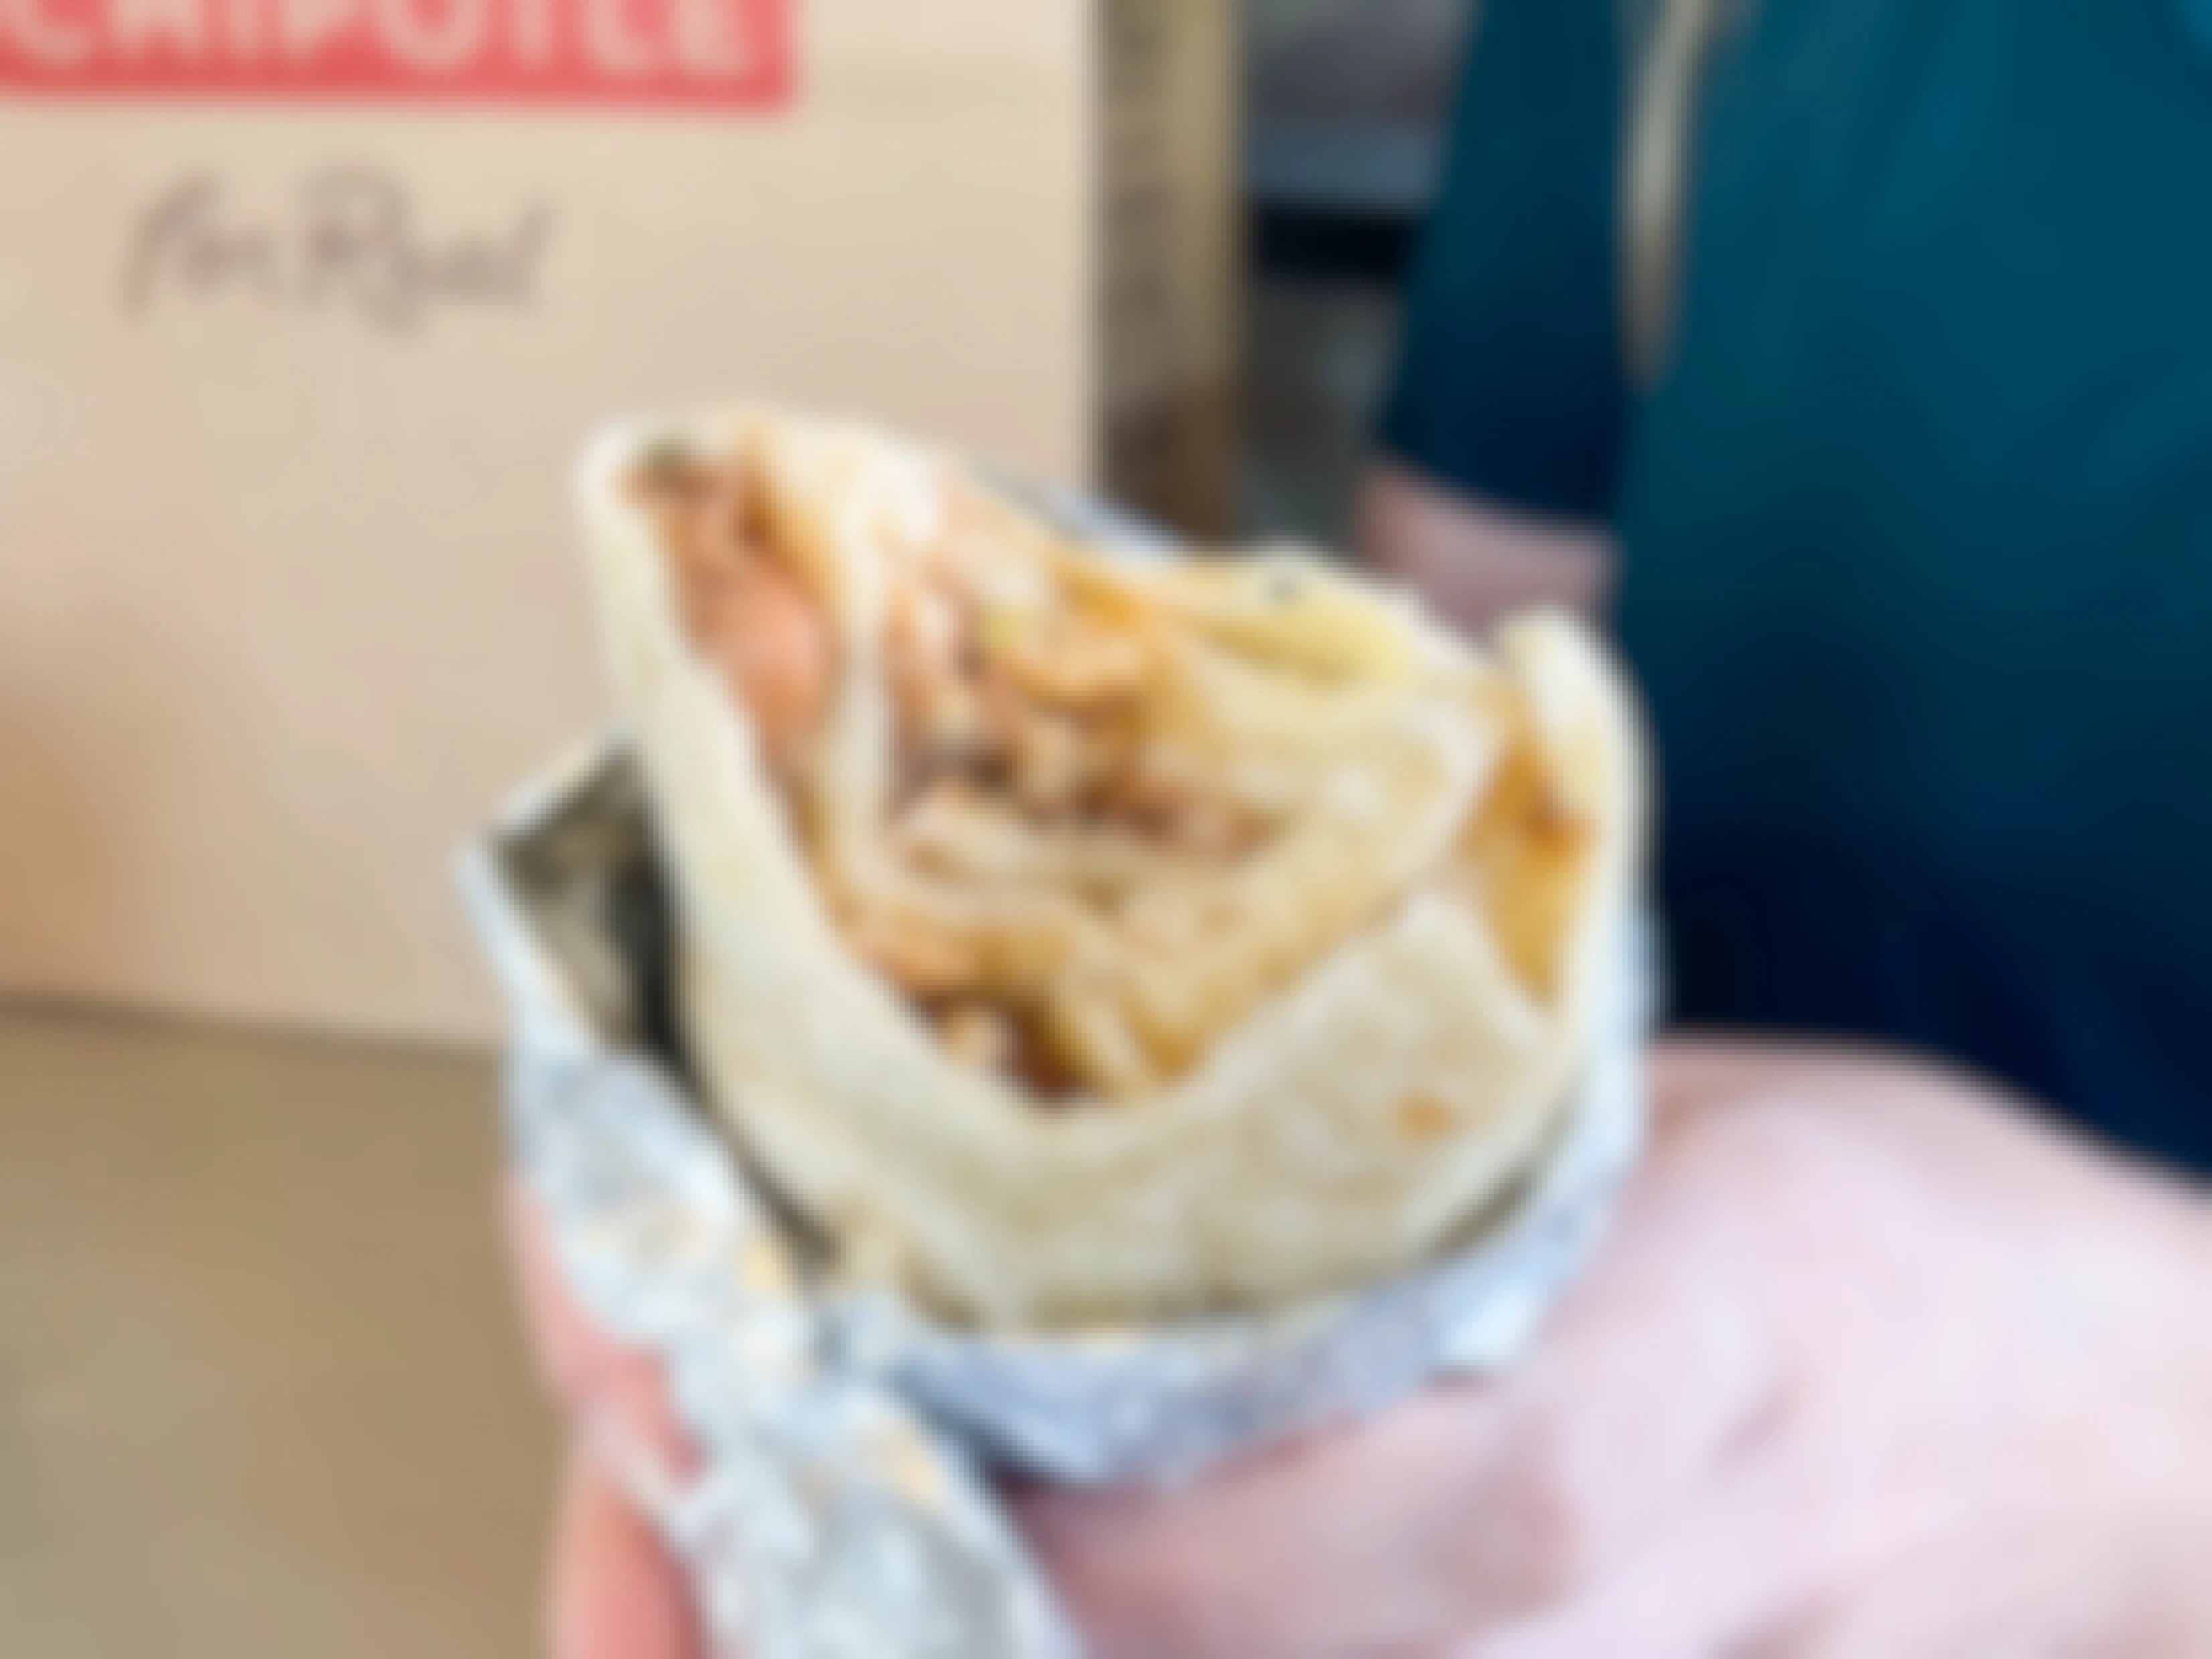 A person holding a chipotle secret menu burrito that has bitten into. The beans chicken and rice are visible inside.